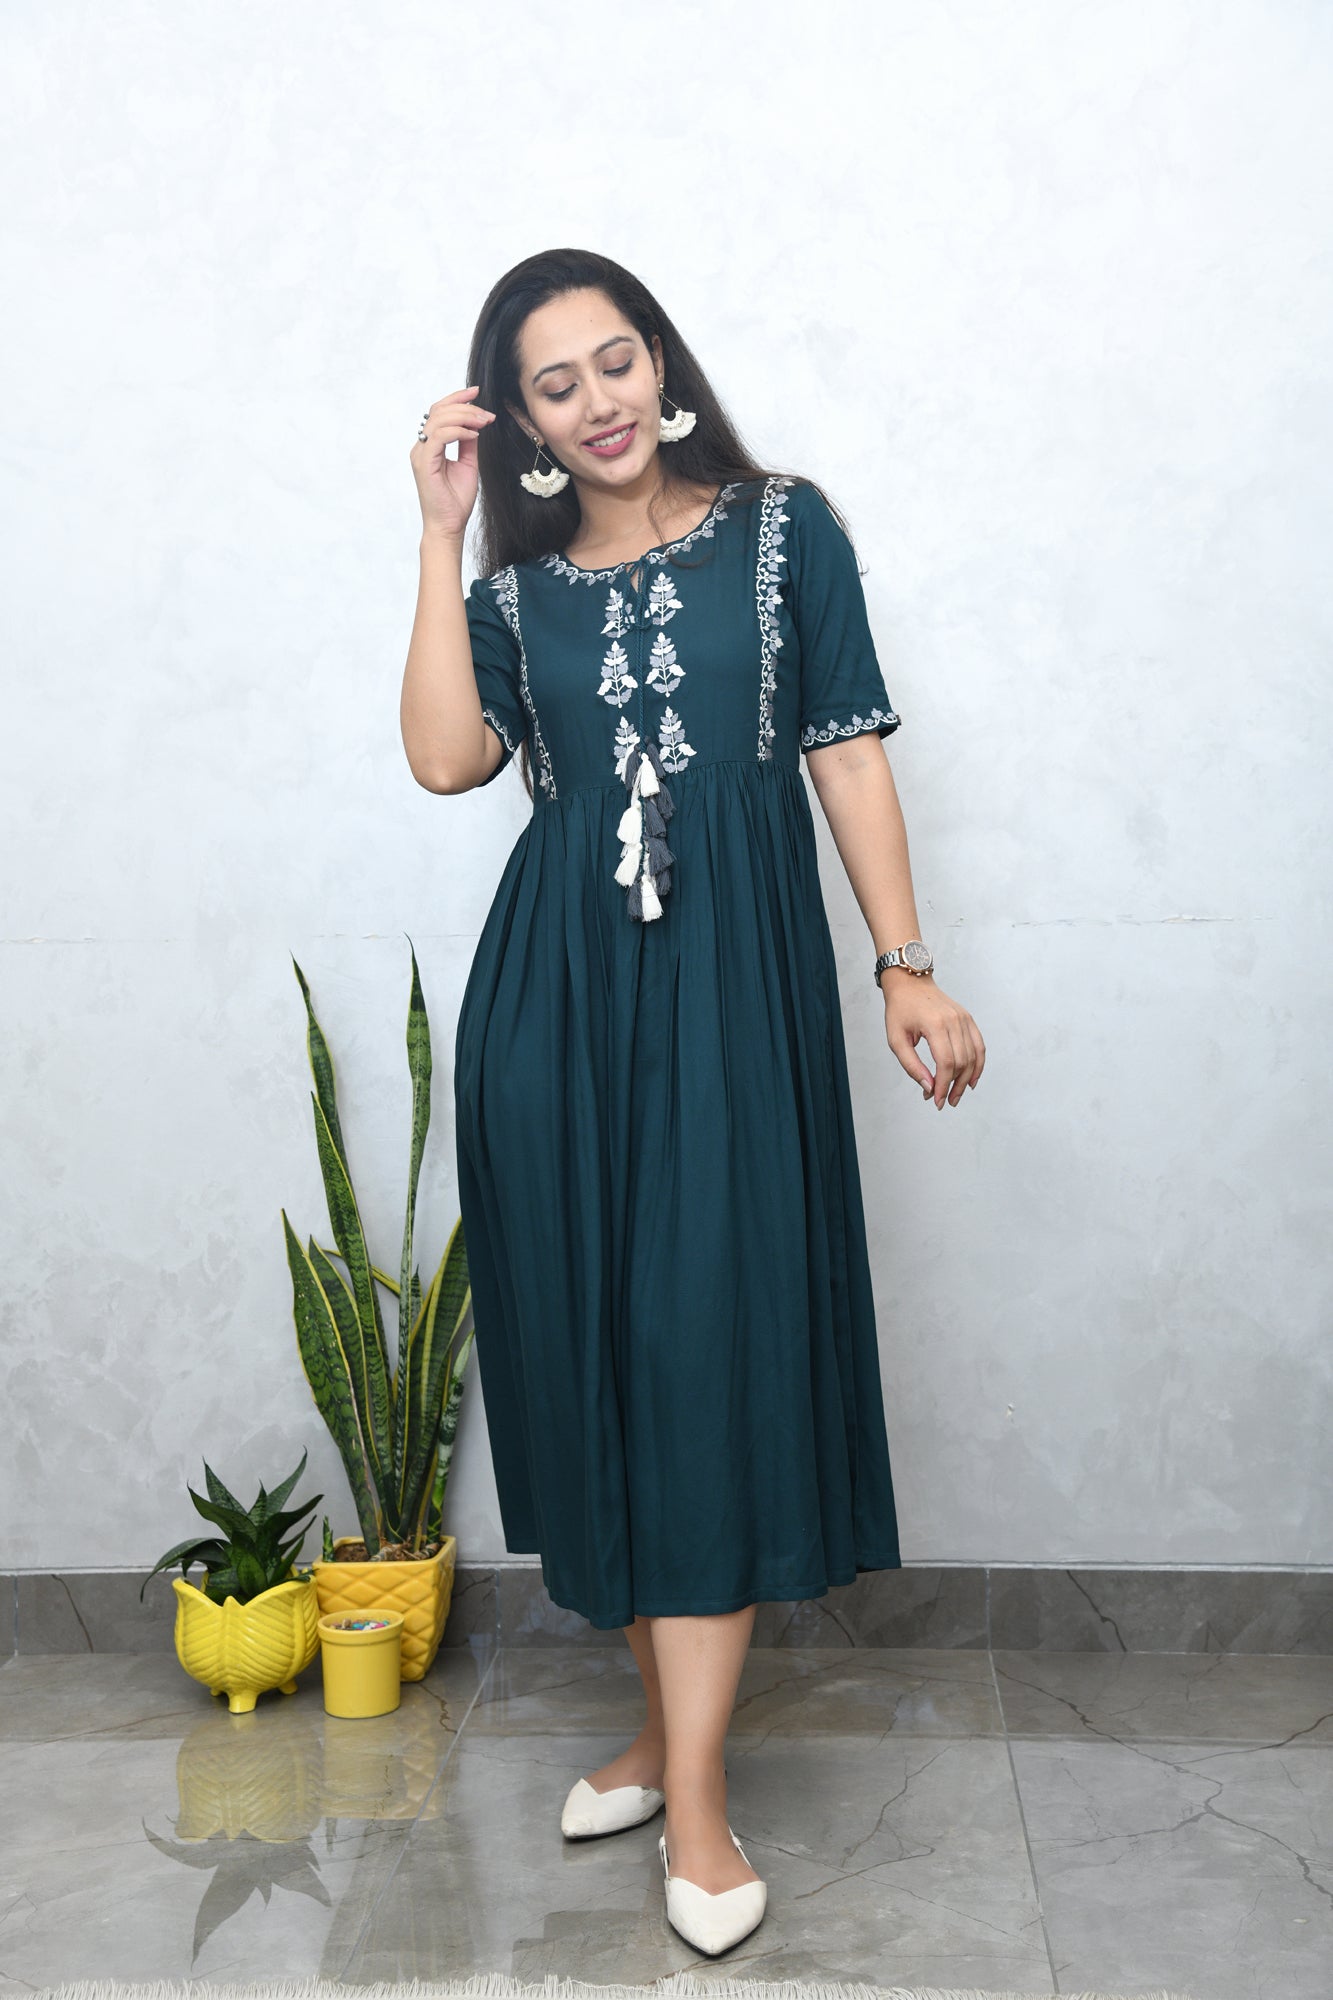 MIDNIGHT GREEN EMBROIDERED DRESS